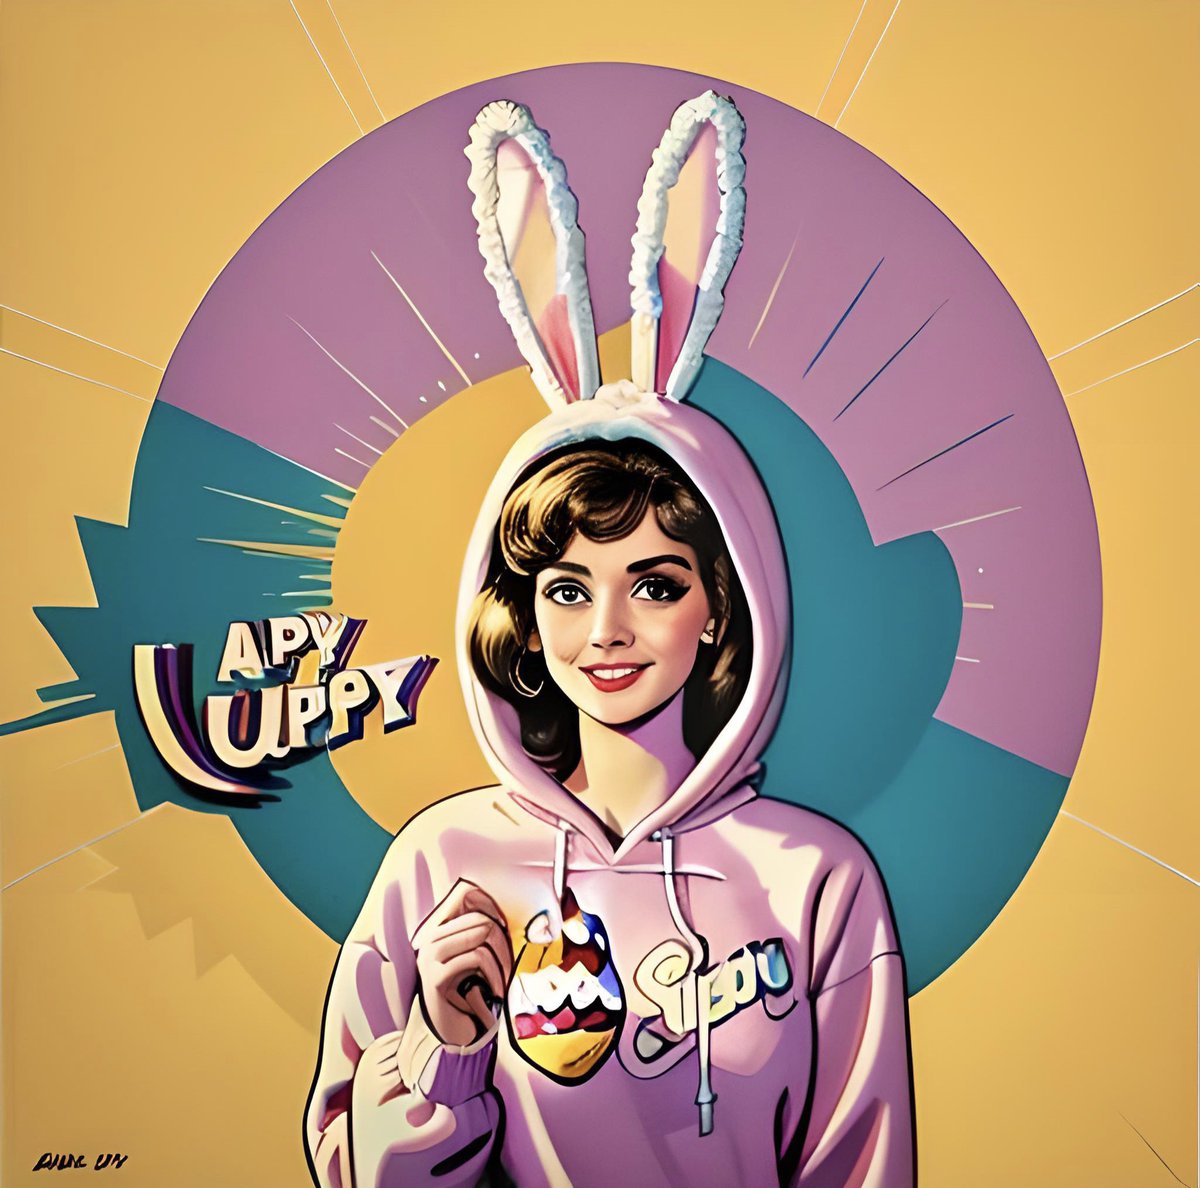 Happy Easter everyone! Let's make it an egg-cellent year filled with new beginnings and hoppy adventures! 🐰🌷 #JavaJolt #EasterBunny #CultClassic #SupportEachOthers